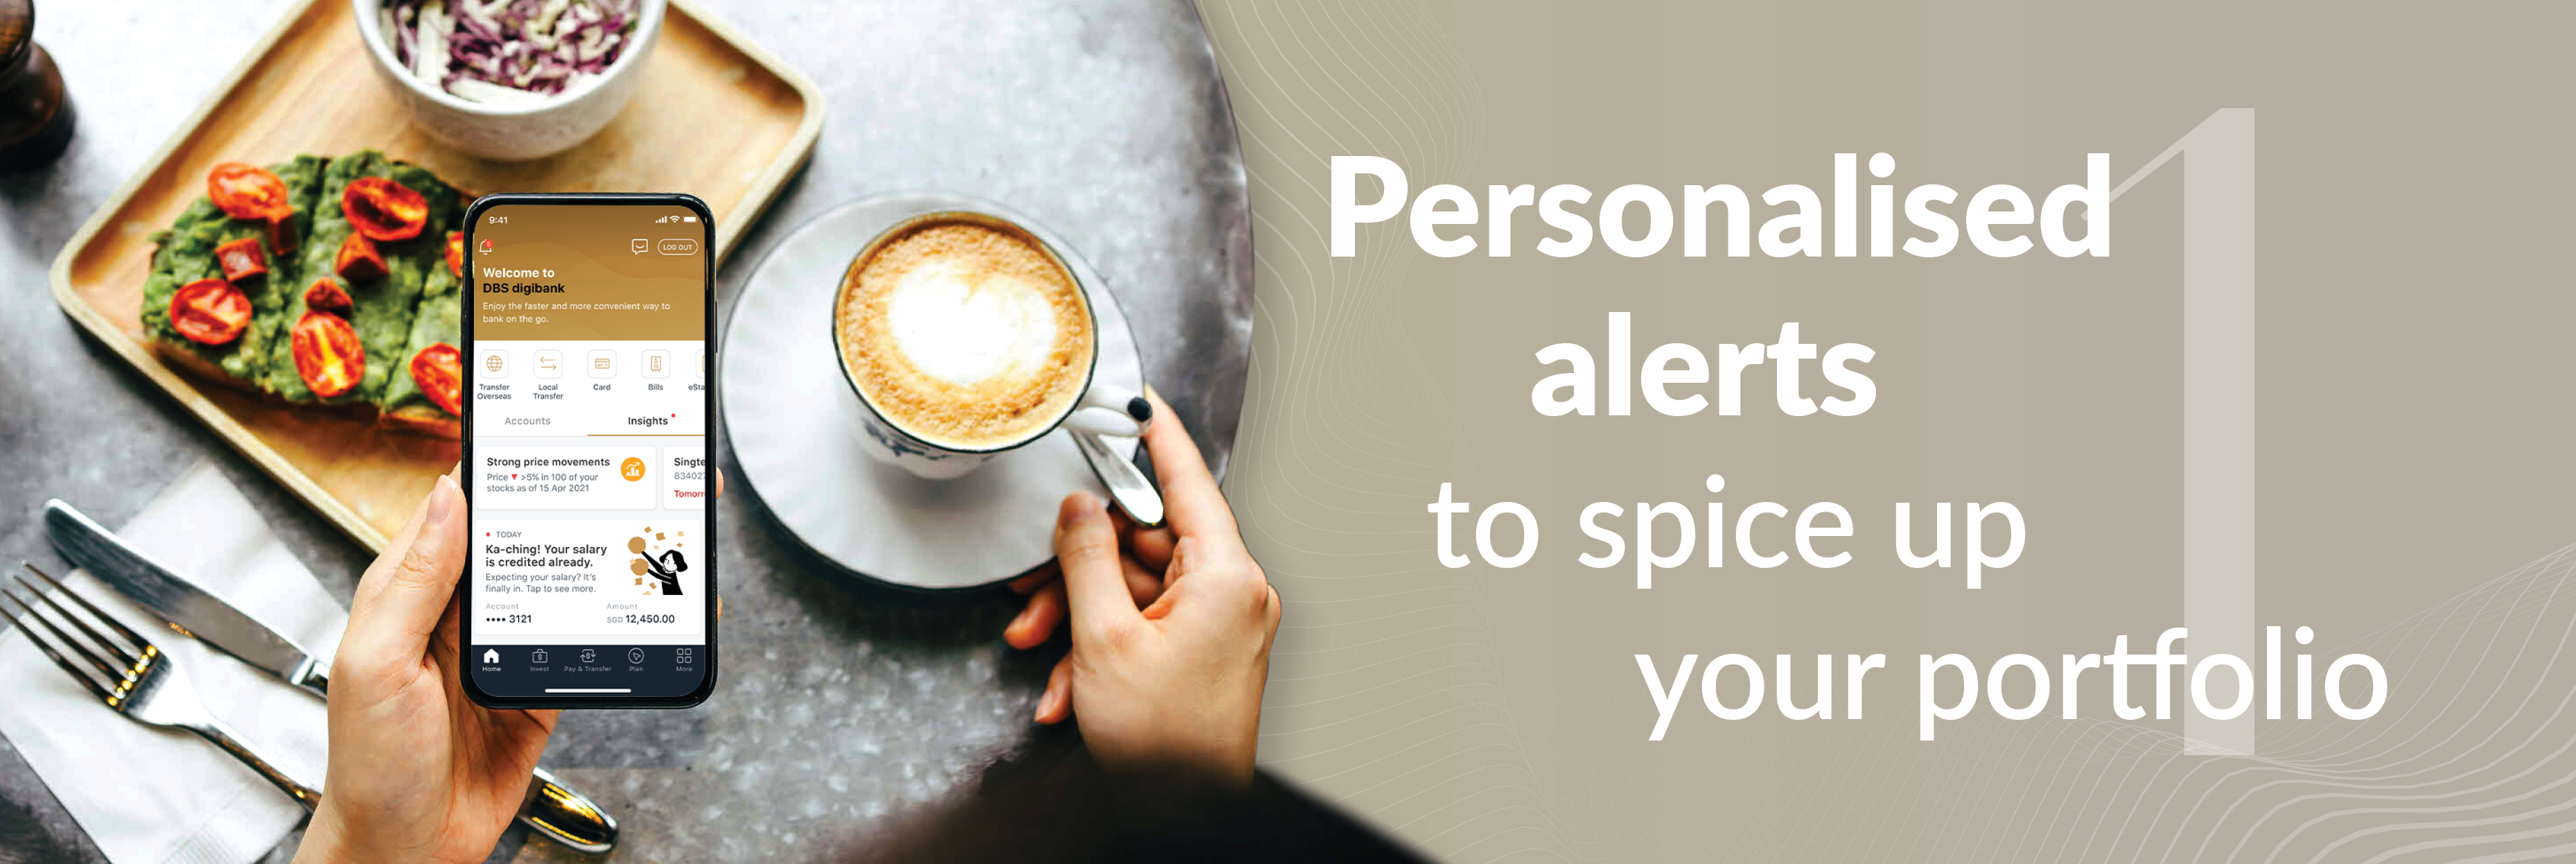 Personalised alerts to spice up your portfolio